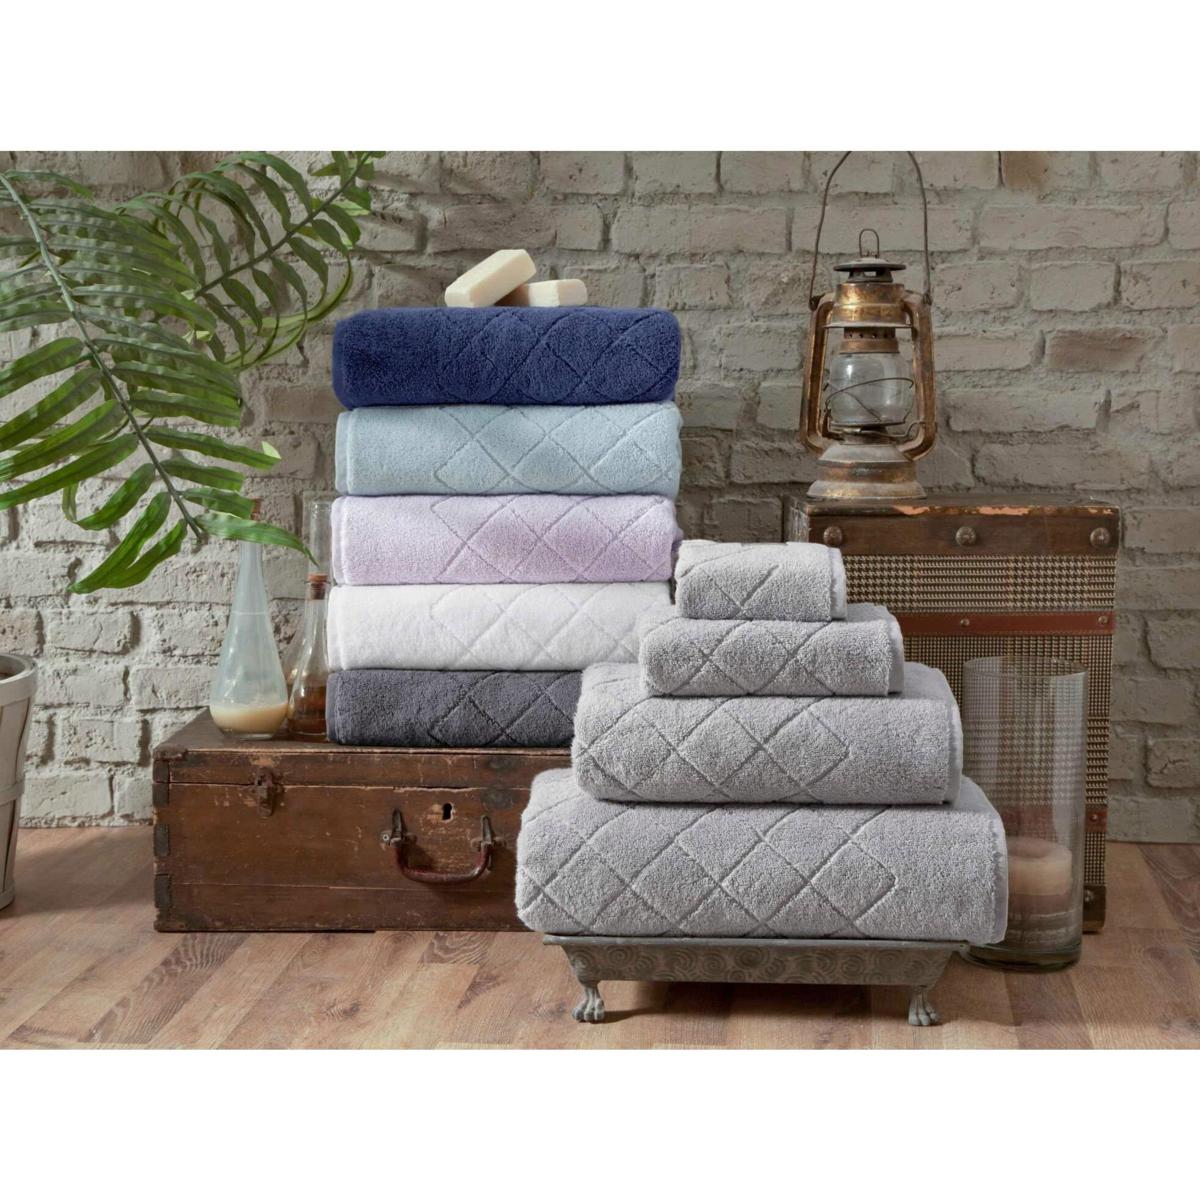 Hastings Home 189181IMB 100% Cotton Hotel 6 Piece Towel